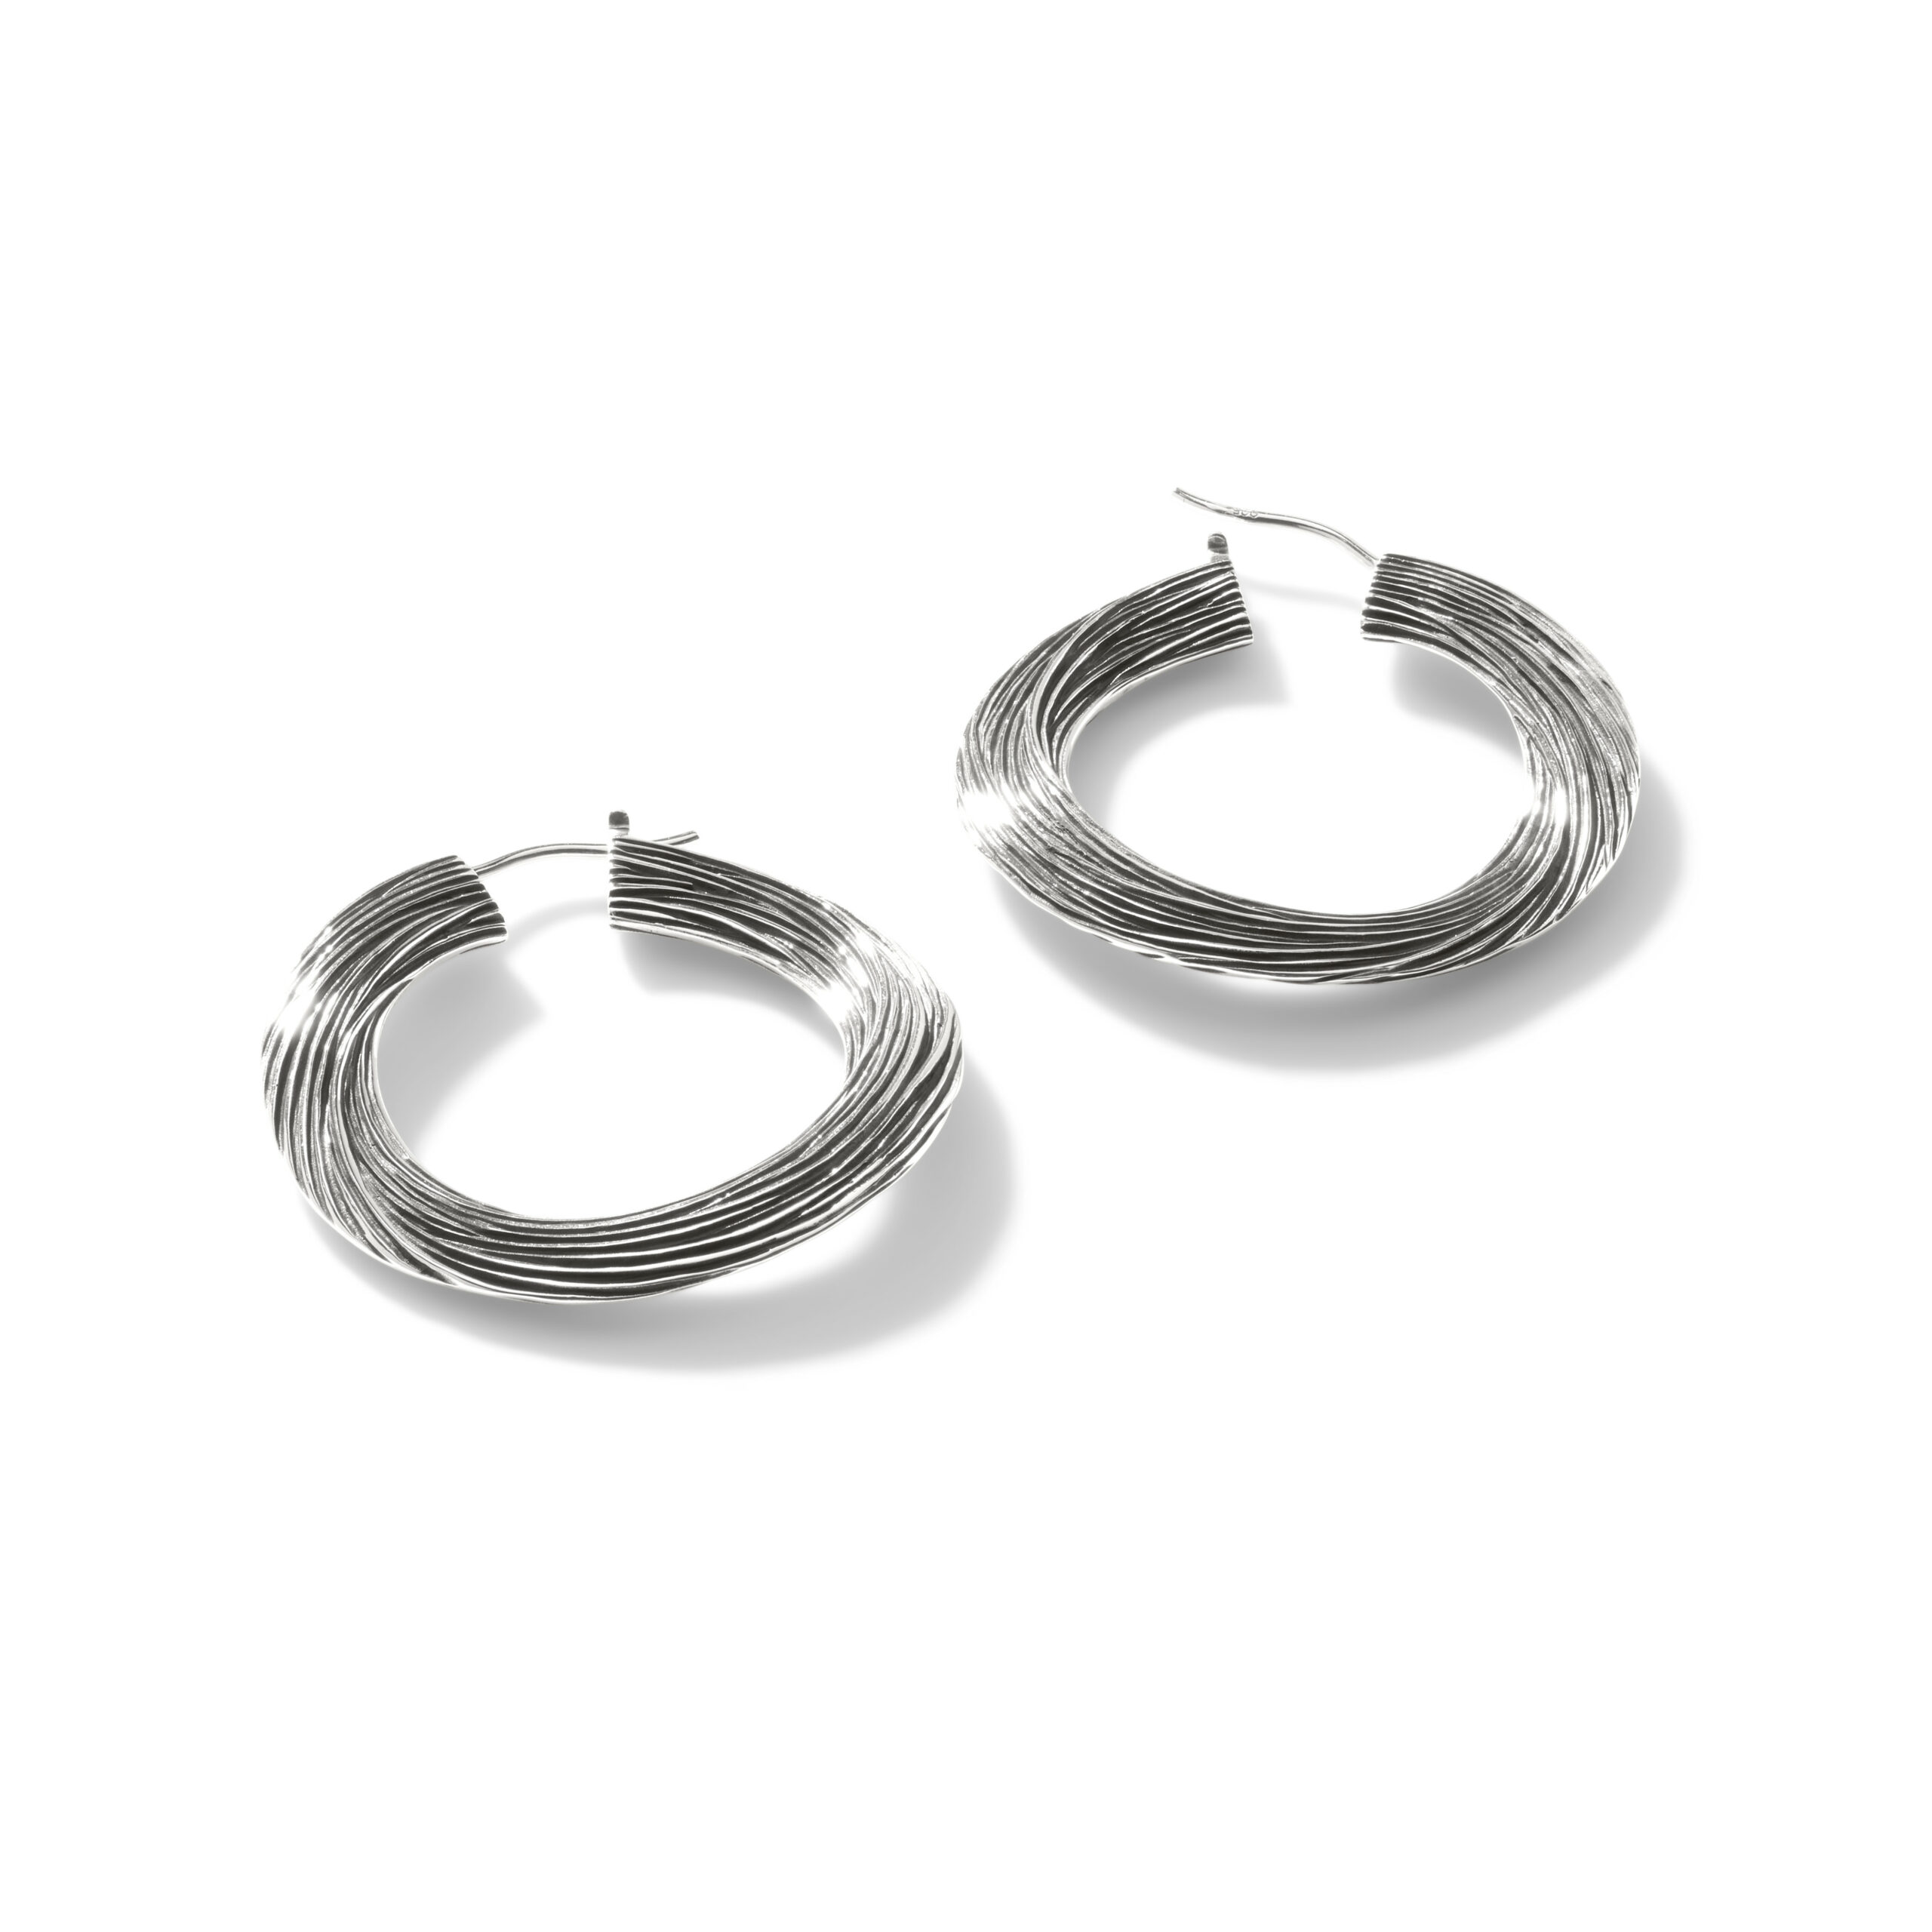 This pair of hoop earrings by John Hardy is crafted from sterling silver.